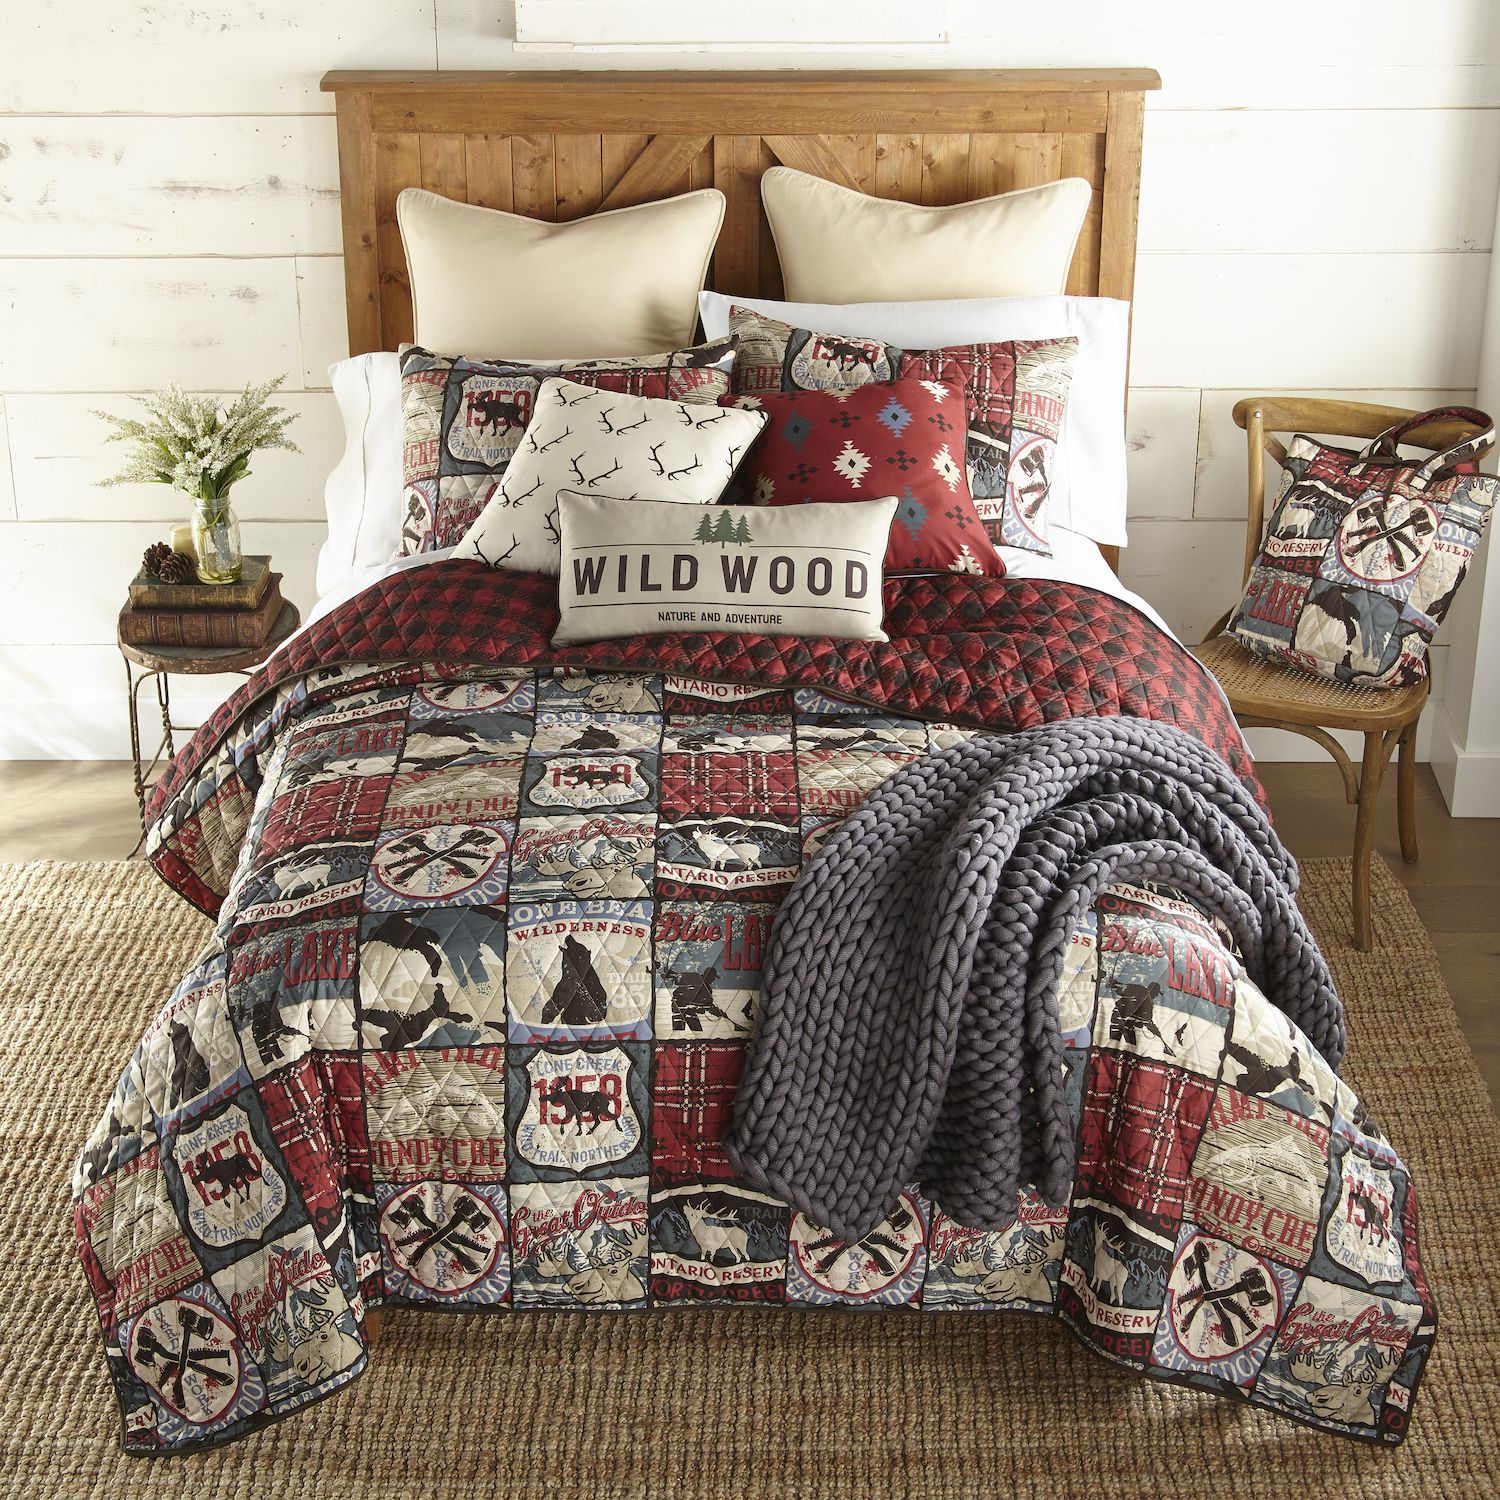 Image for Donna Sharp Great Outdoors Quilt Set with Shams at Kohl's.